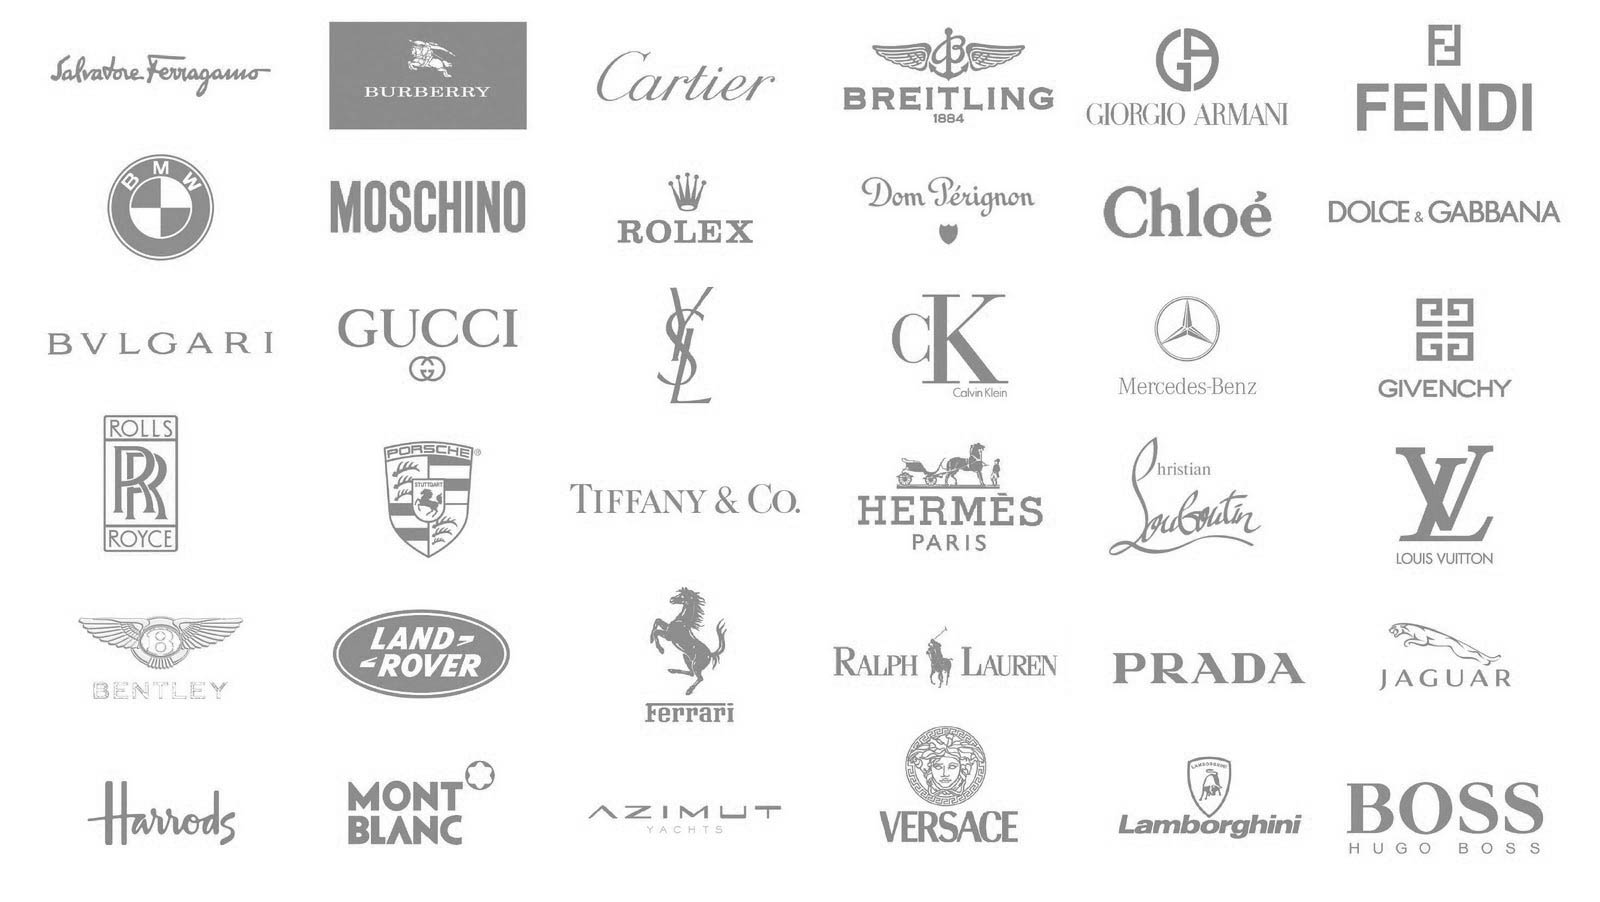 Assortment of logos of luxury brands used to talk about luxury management in SP Jain as one of the top MBA programs